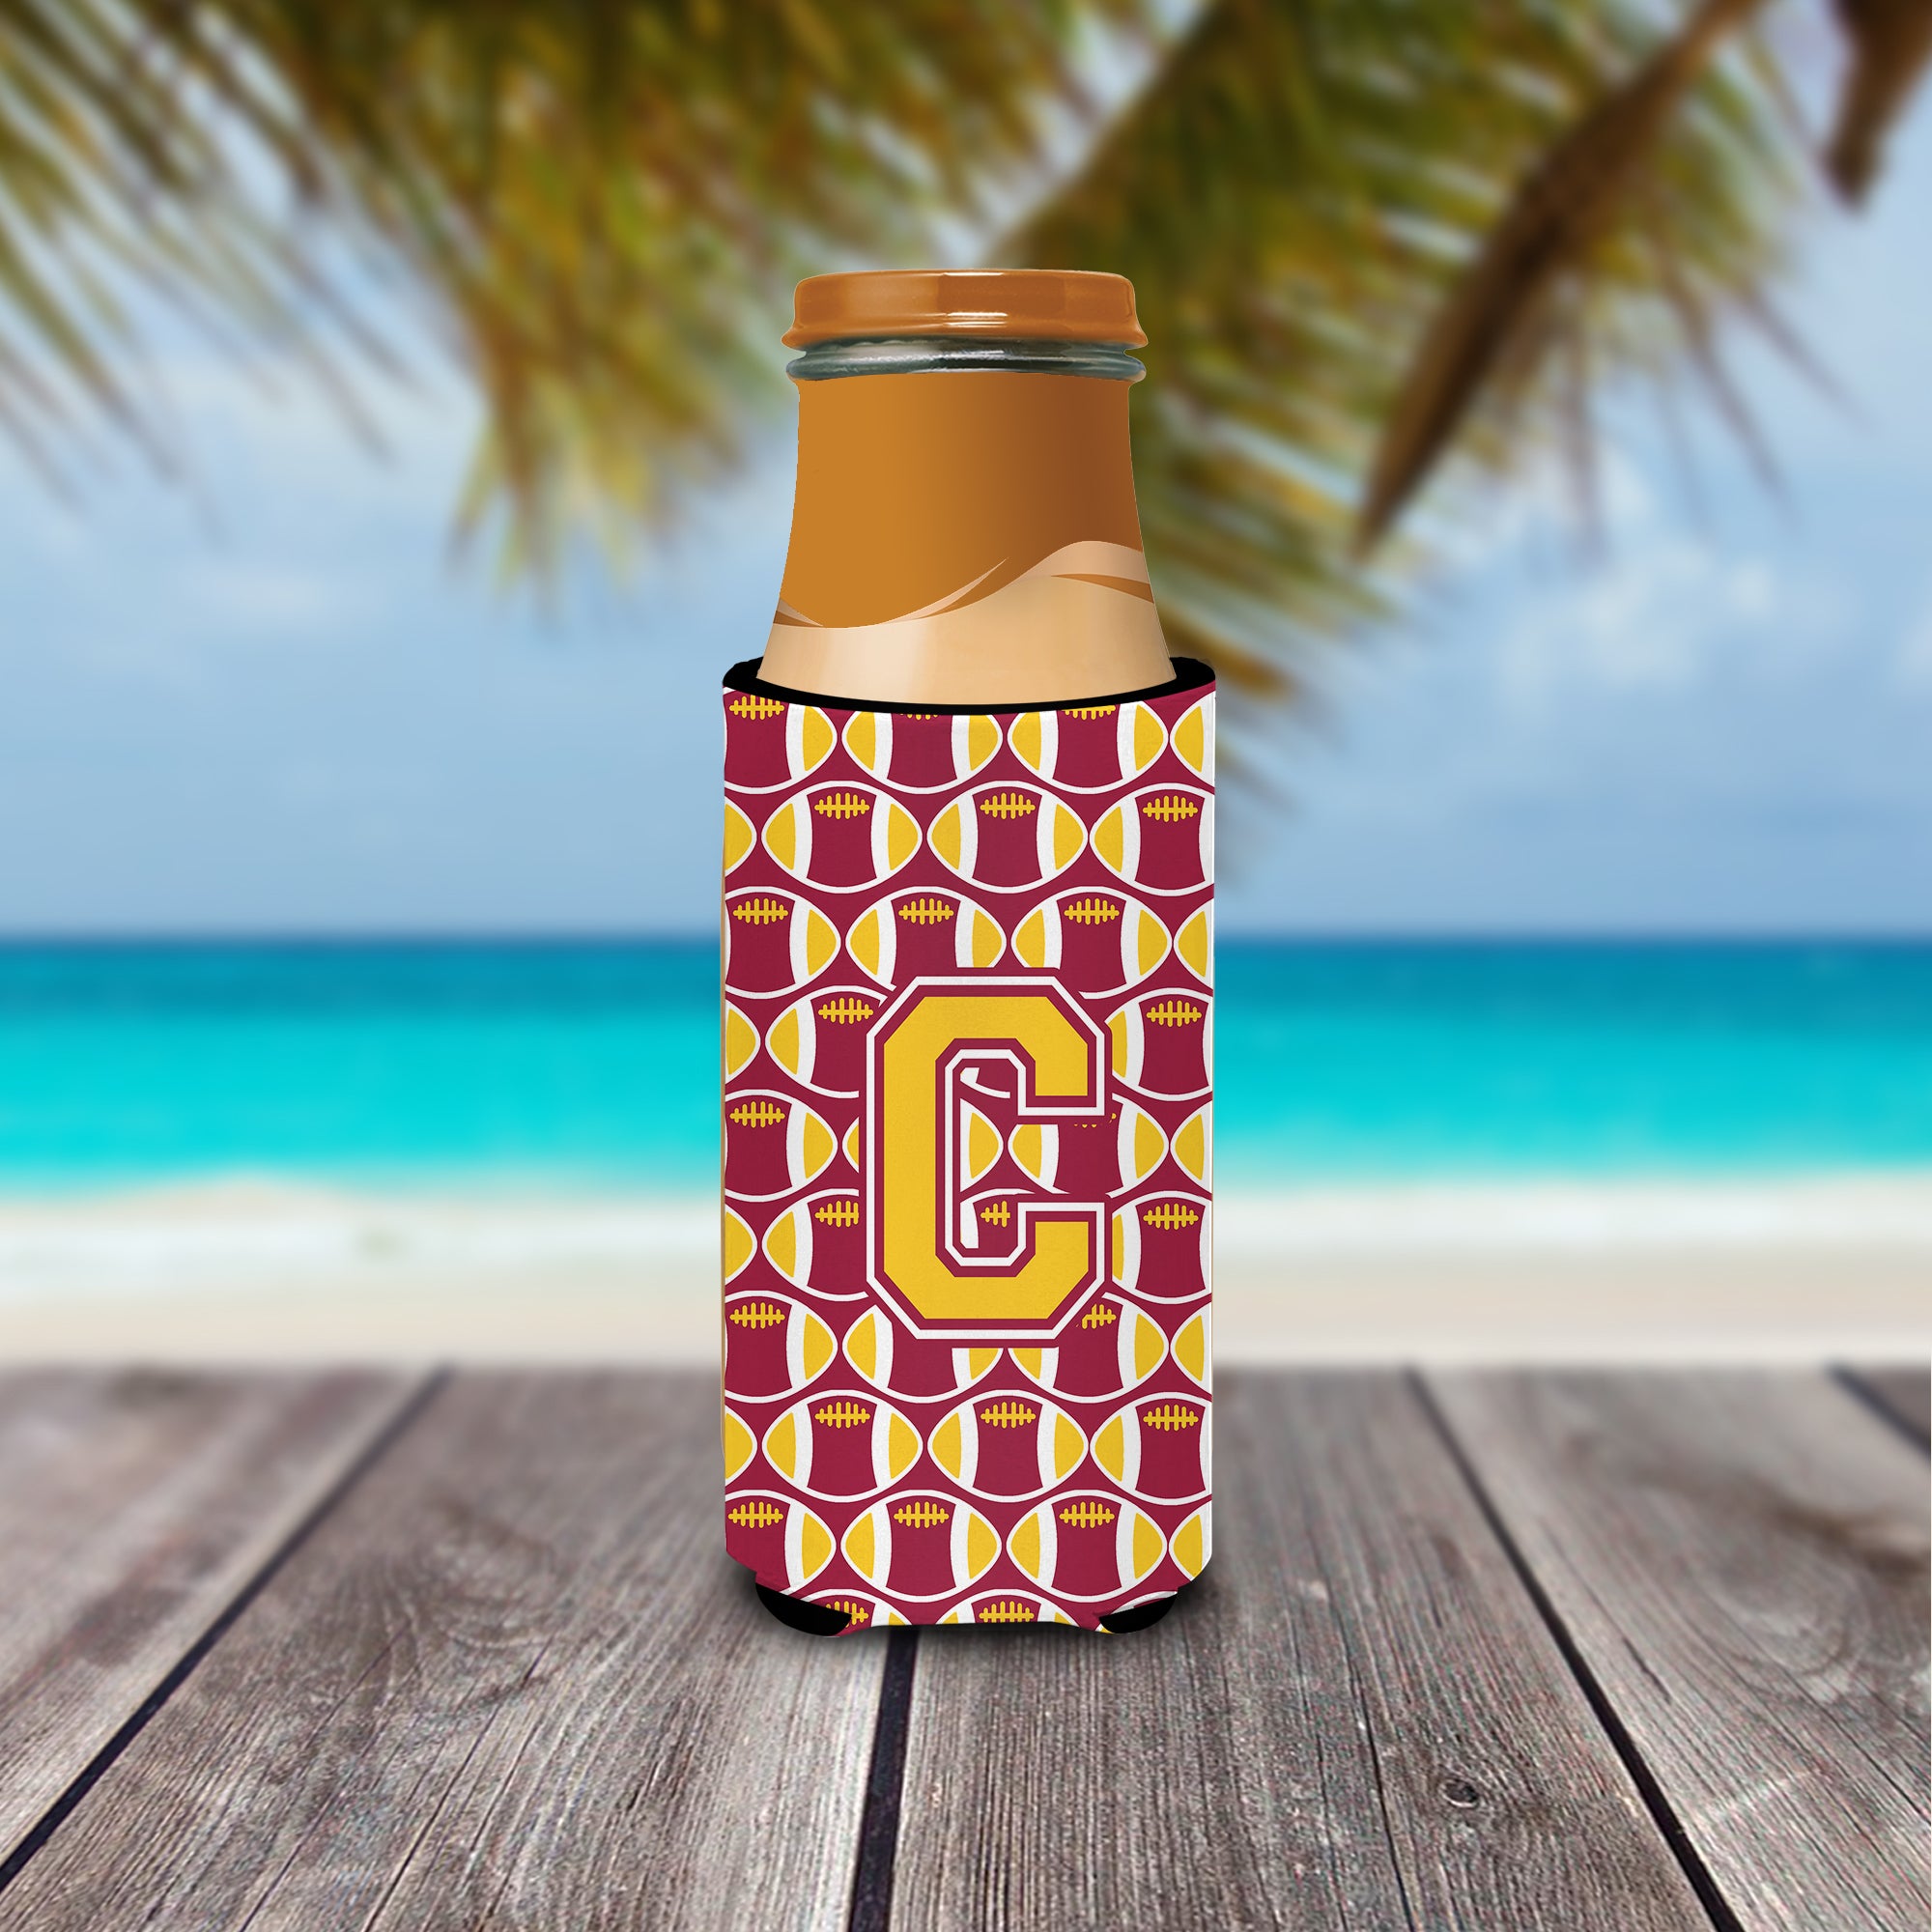 Letter C Football Maroon and Gold Ultra Beverage Insulators for slim cans CJ1081-CMUK.